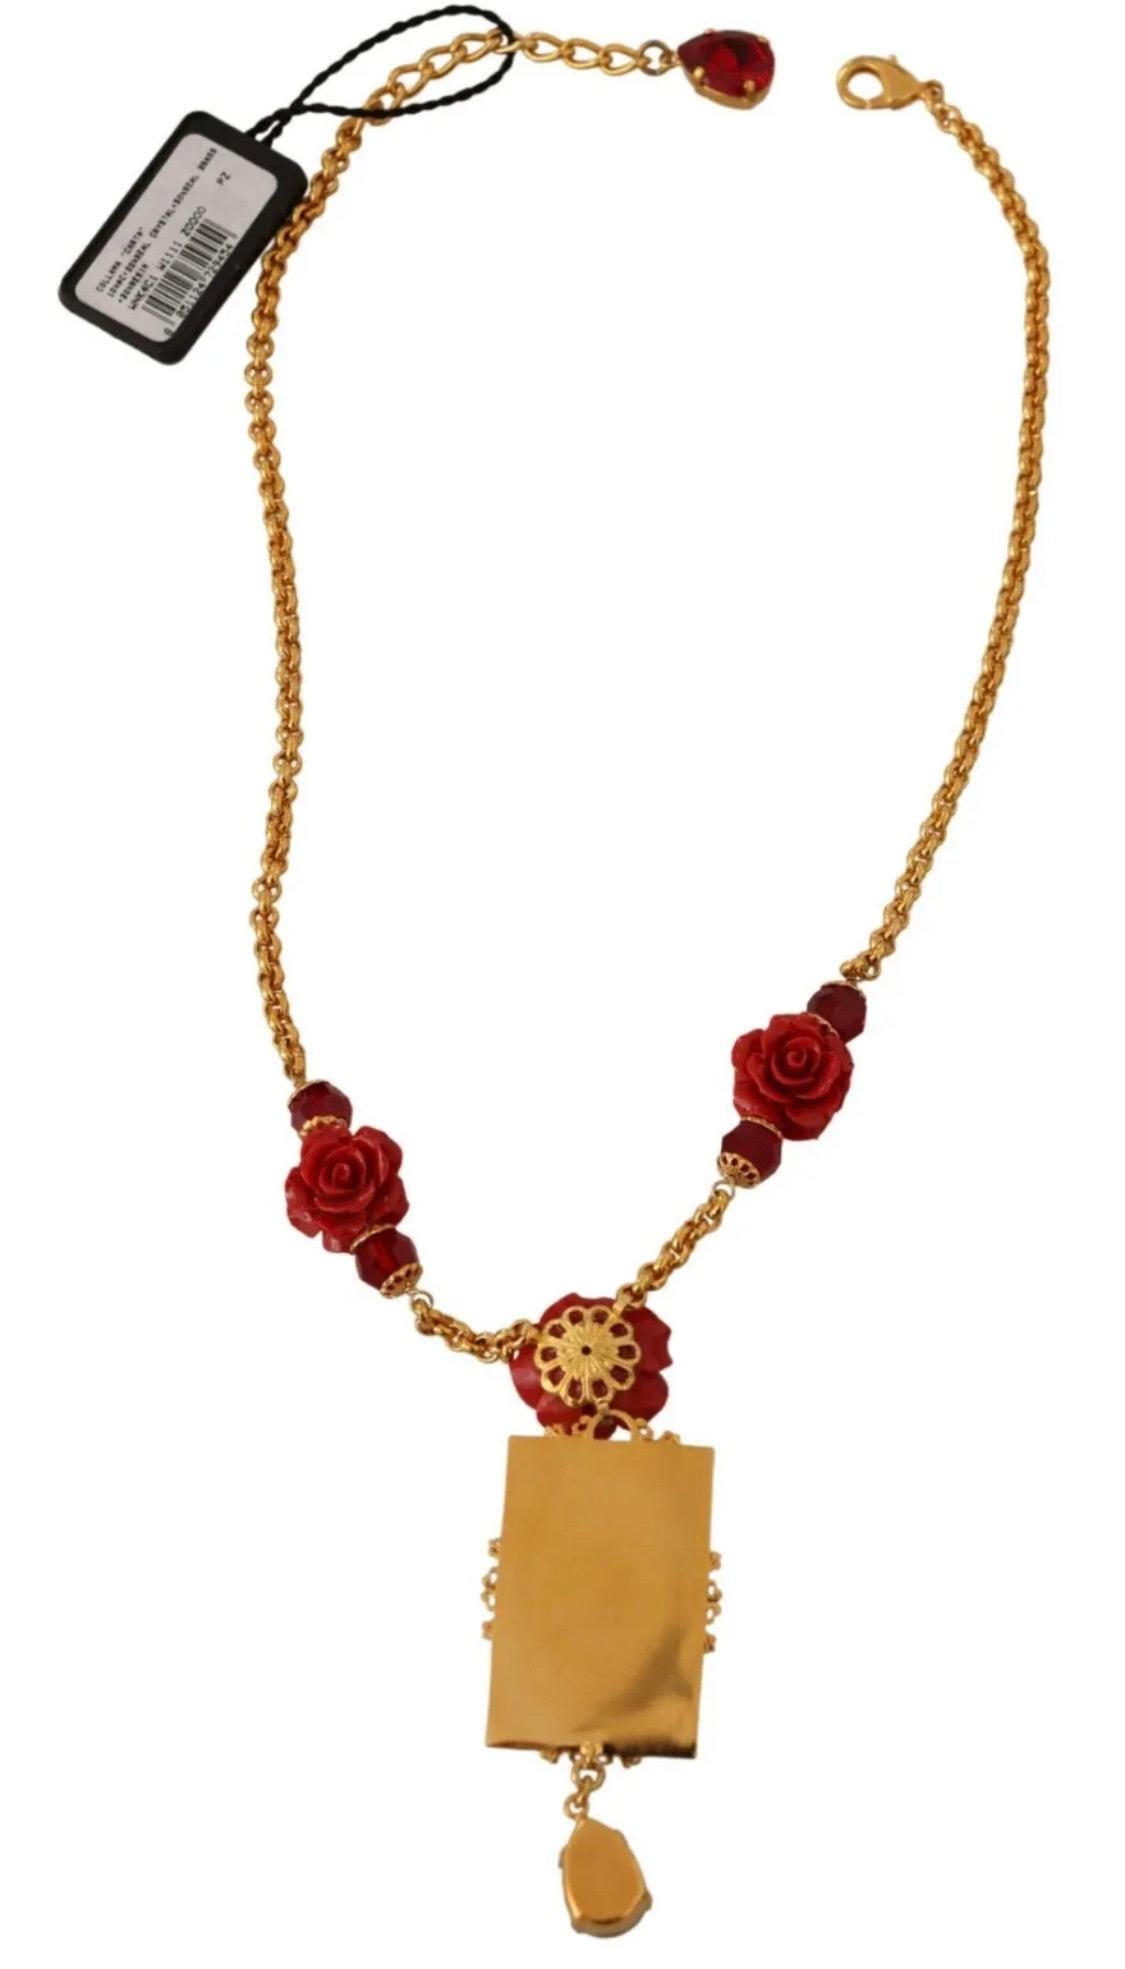 Dolce & Gabbana Gold tone necklace with Resin Flower Card Deck Crystal Pendant For Sale 3